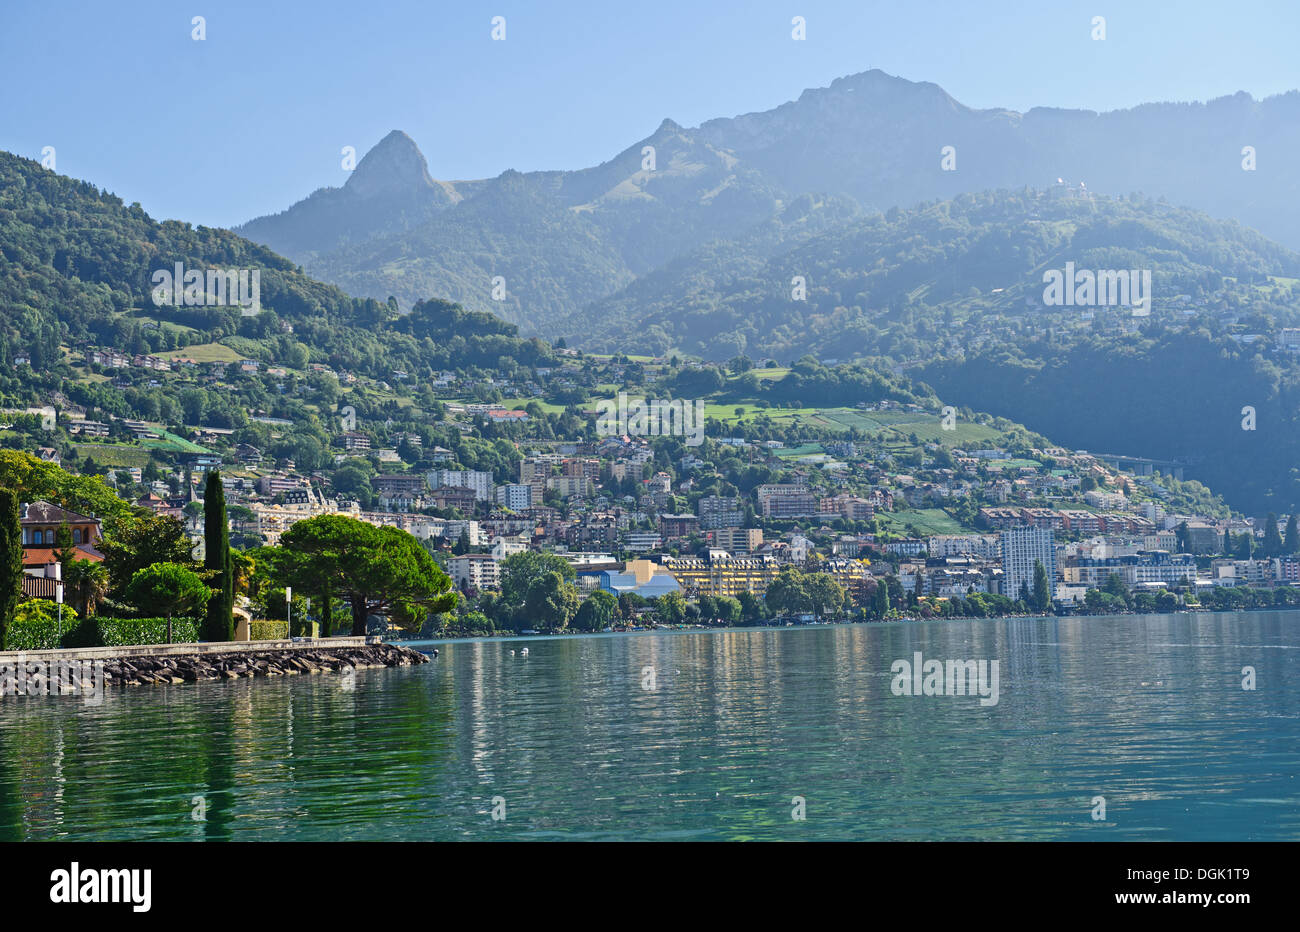 Geneve lake in Montreux in the canton of Vaud in Switzerland. Stock Photo